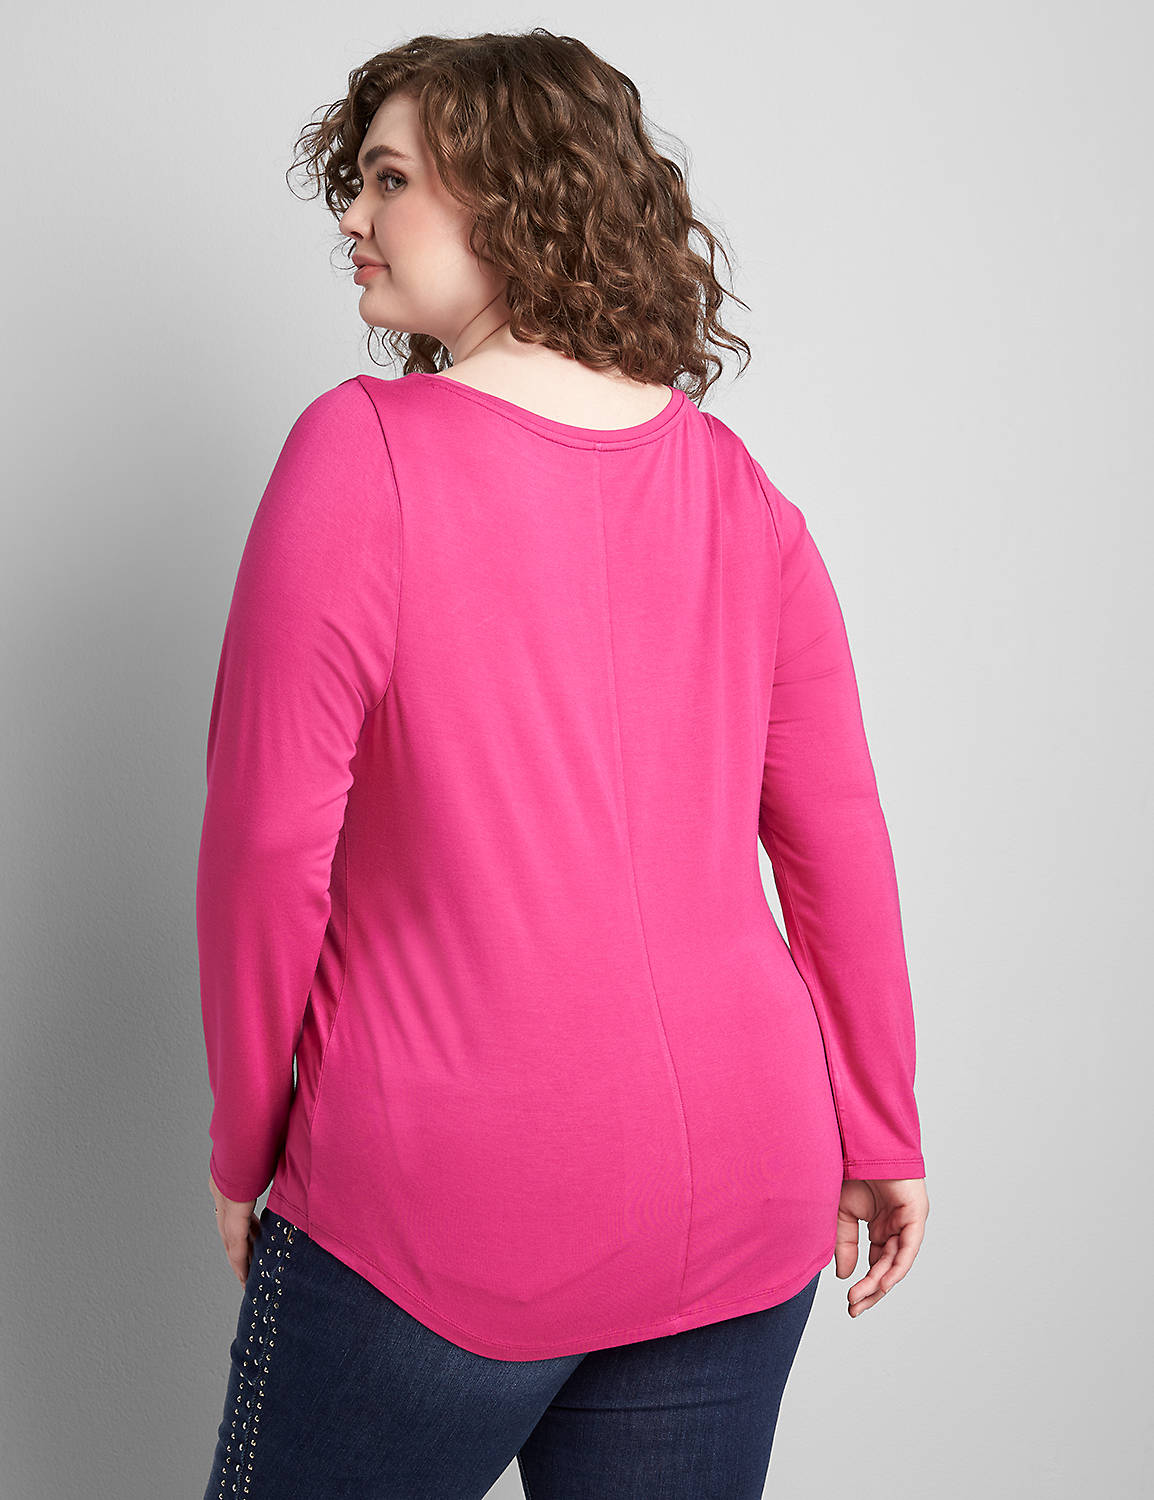 Long Sleeve Boat Neck Curved Hem Printed Tee 1122445 copy of 1122437:PANTONE Fuchsia Red:10/12 Product Image 2